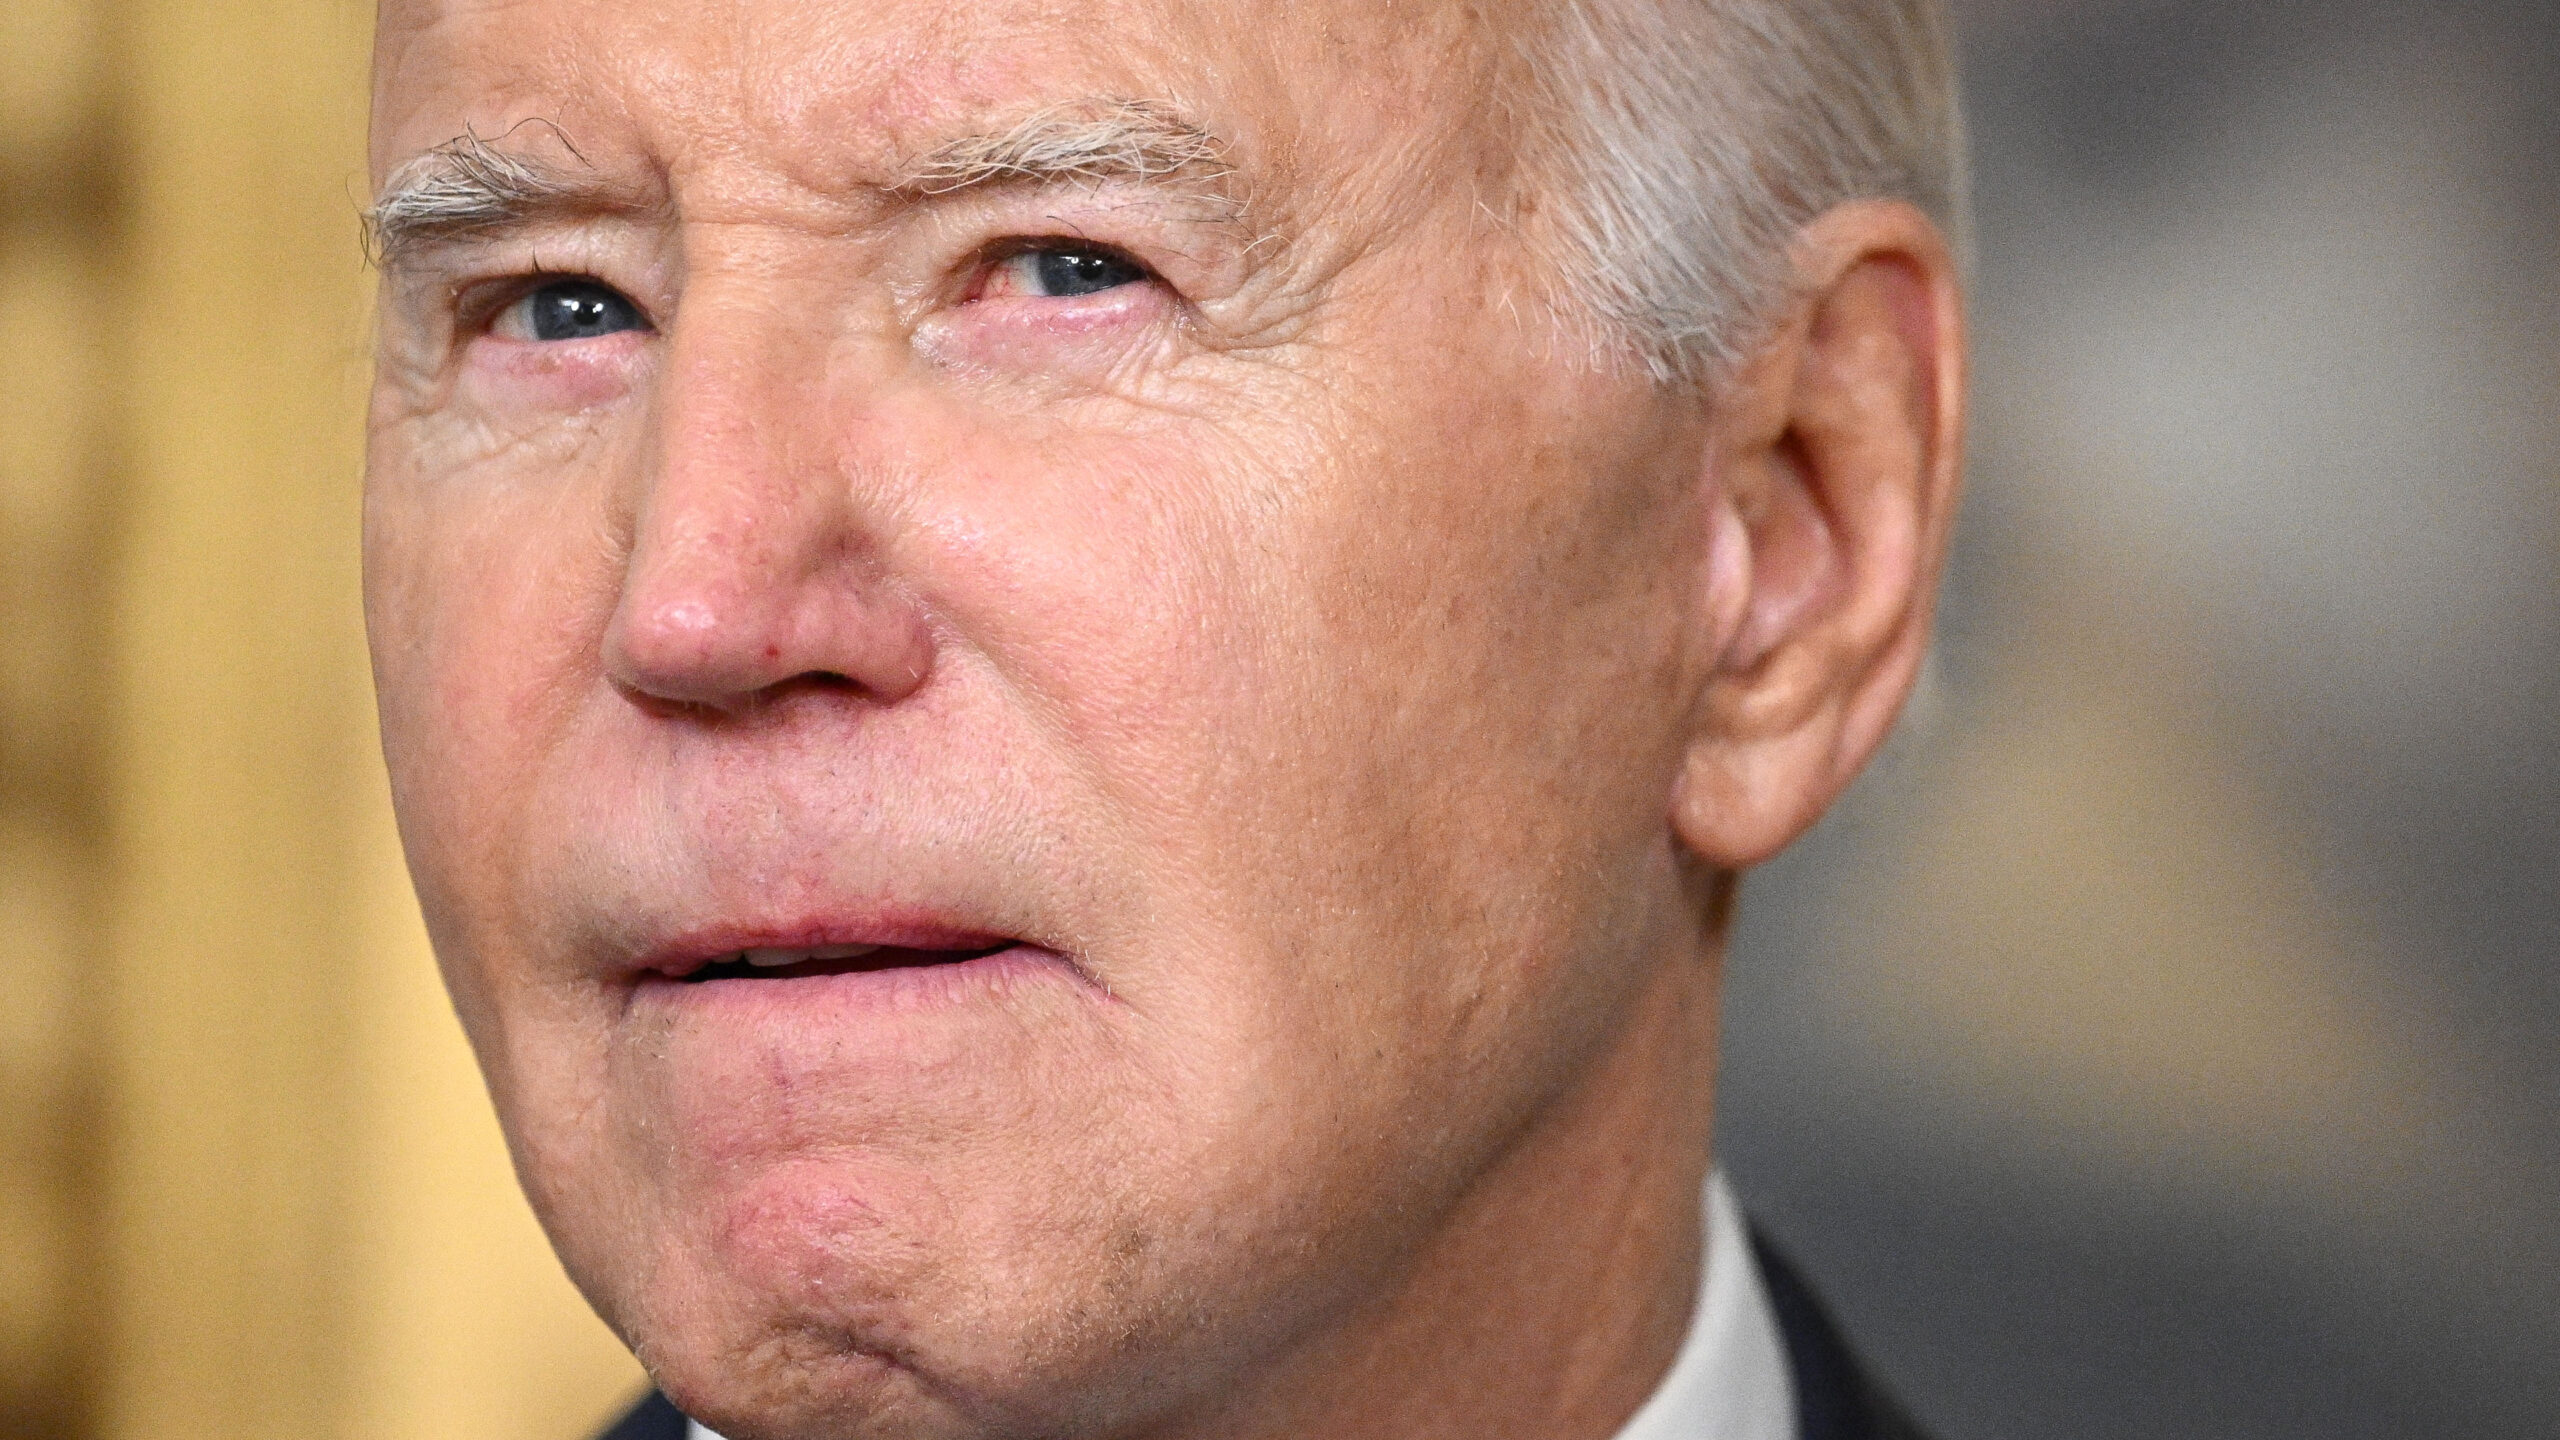 Biden Explodes During Press Conference On His Mental Fitness, Makes Several Mental Mistakes